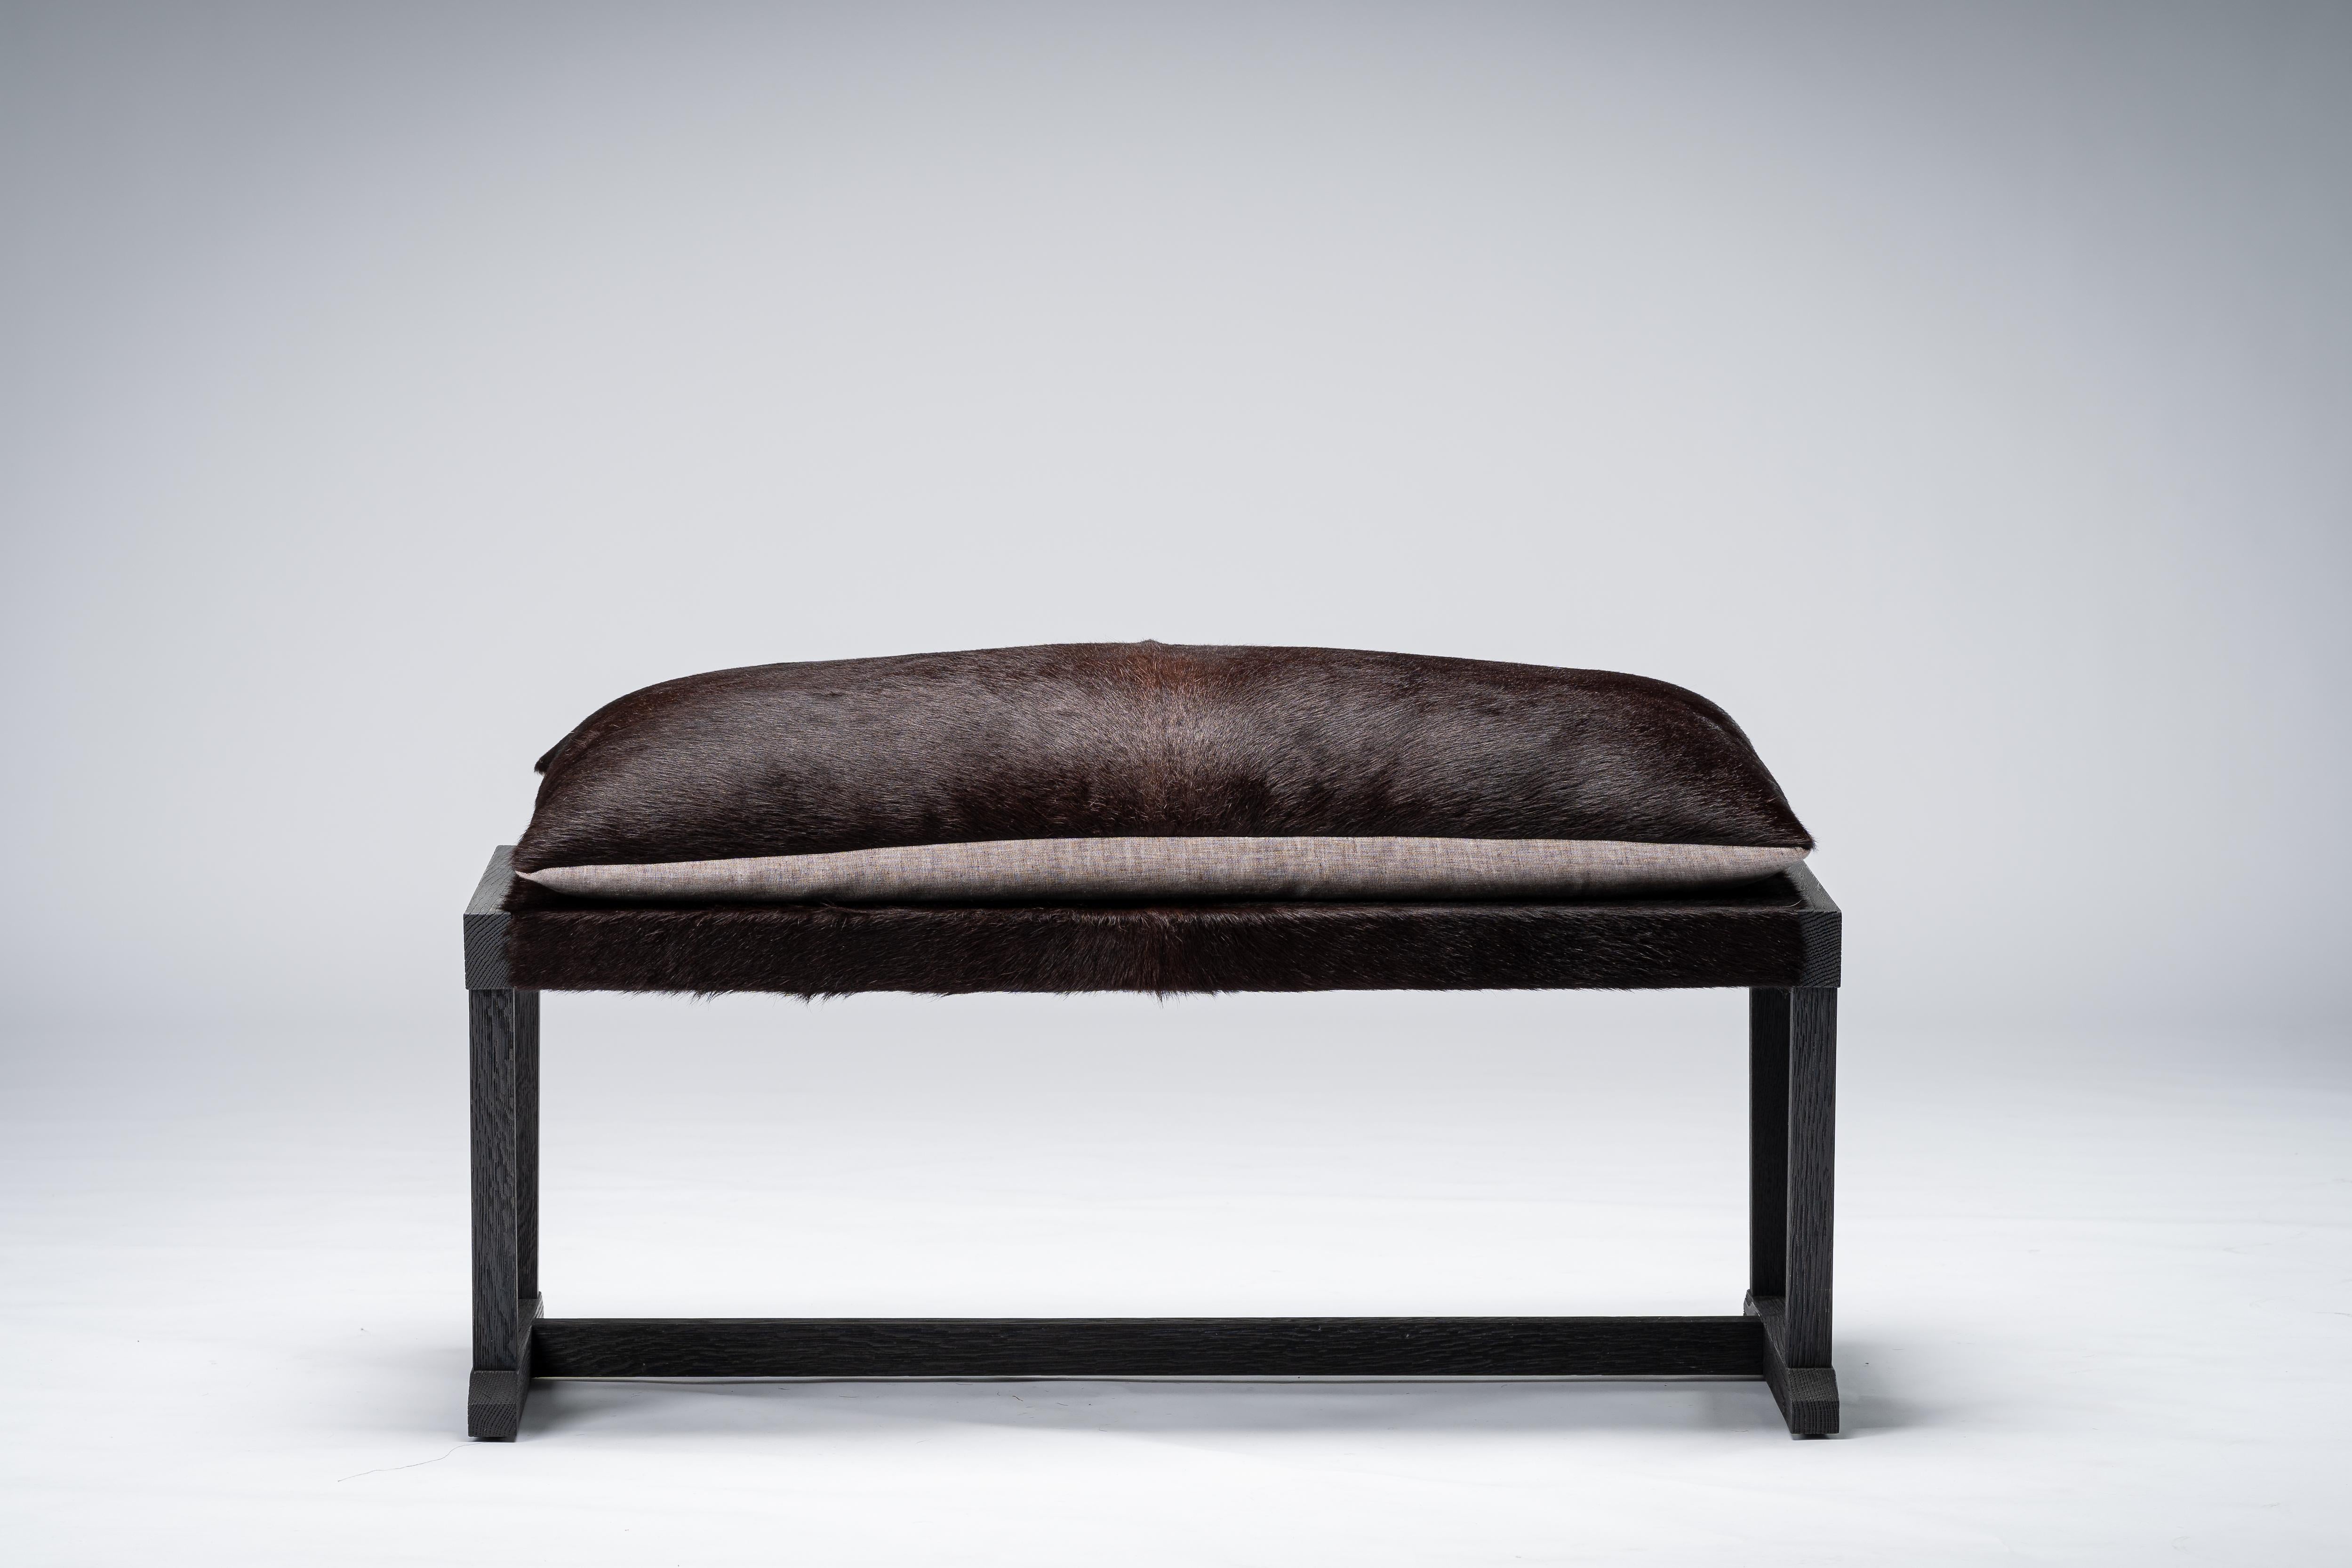 LOUIS bench by Mandy Graham

LOUIS
L02 - Bench
Walnut/sandblasted oak with hairy cowhide loose cushion seat
Measures: 42